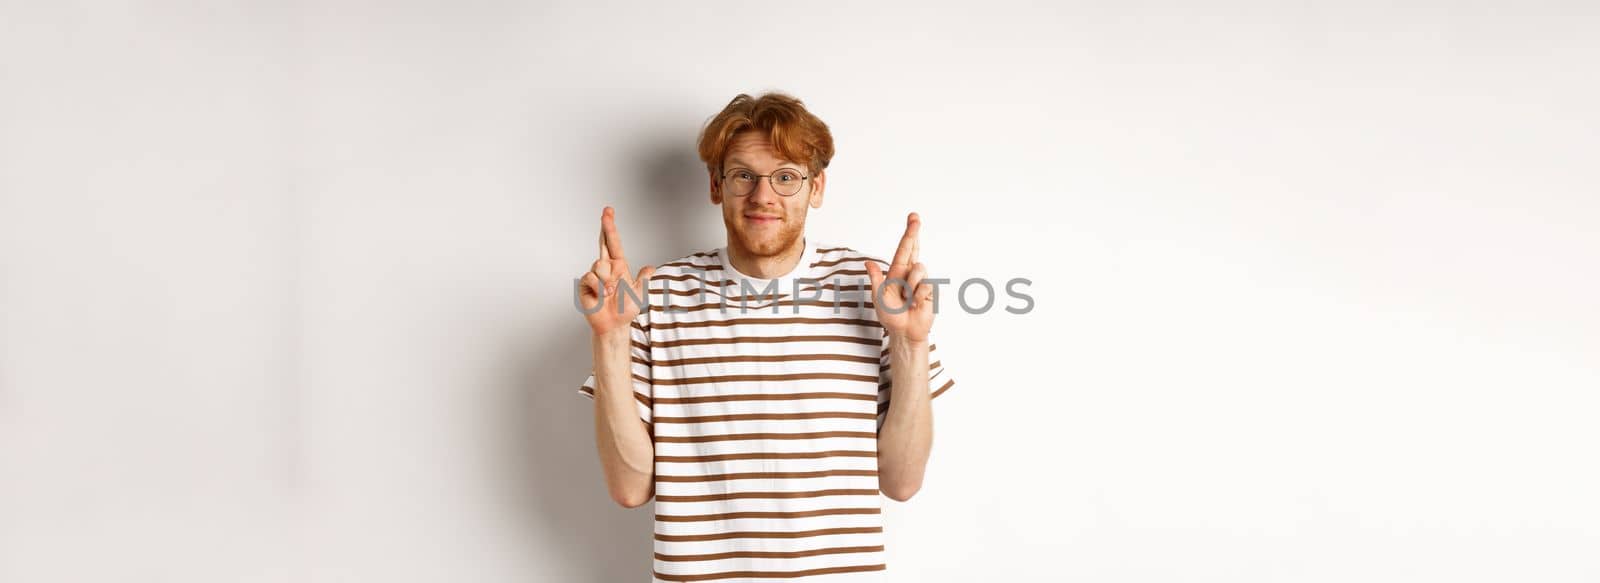 Hopeful young man with red hair and glasses cross fingers for good luck, making wish, standing over white background.